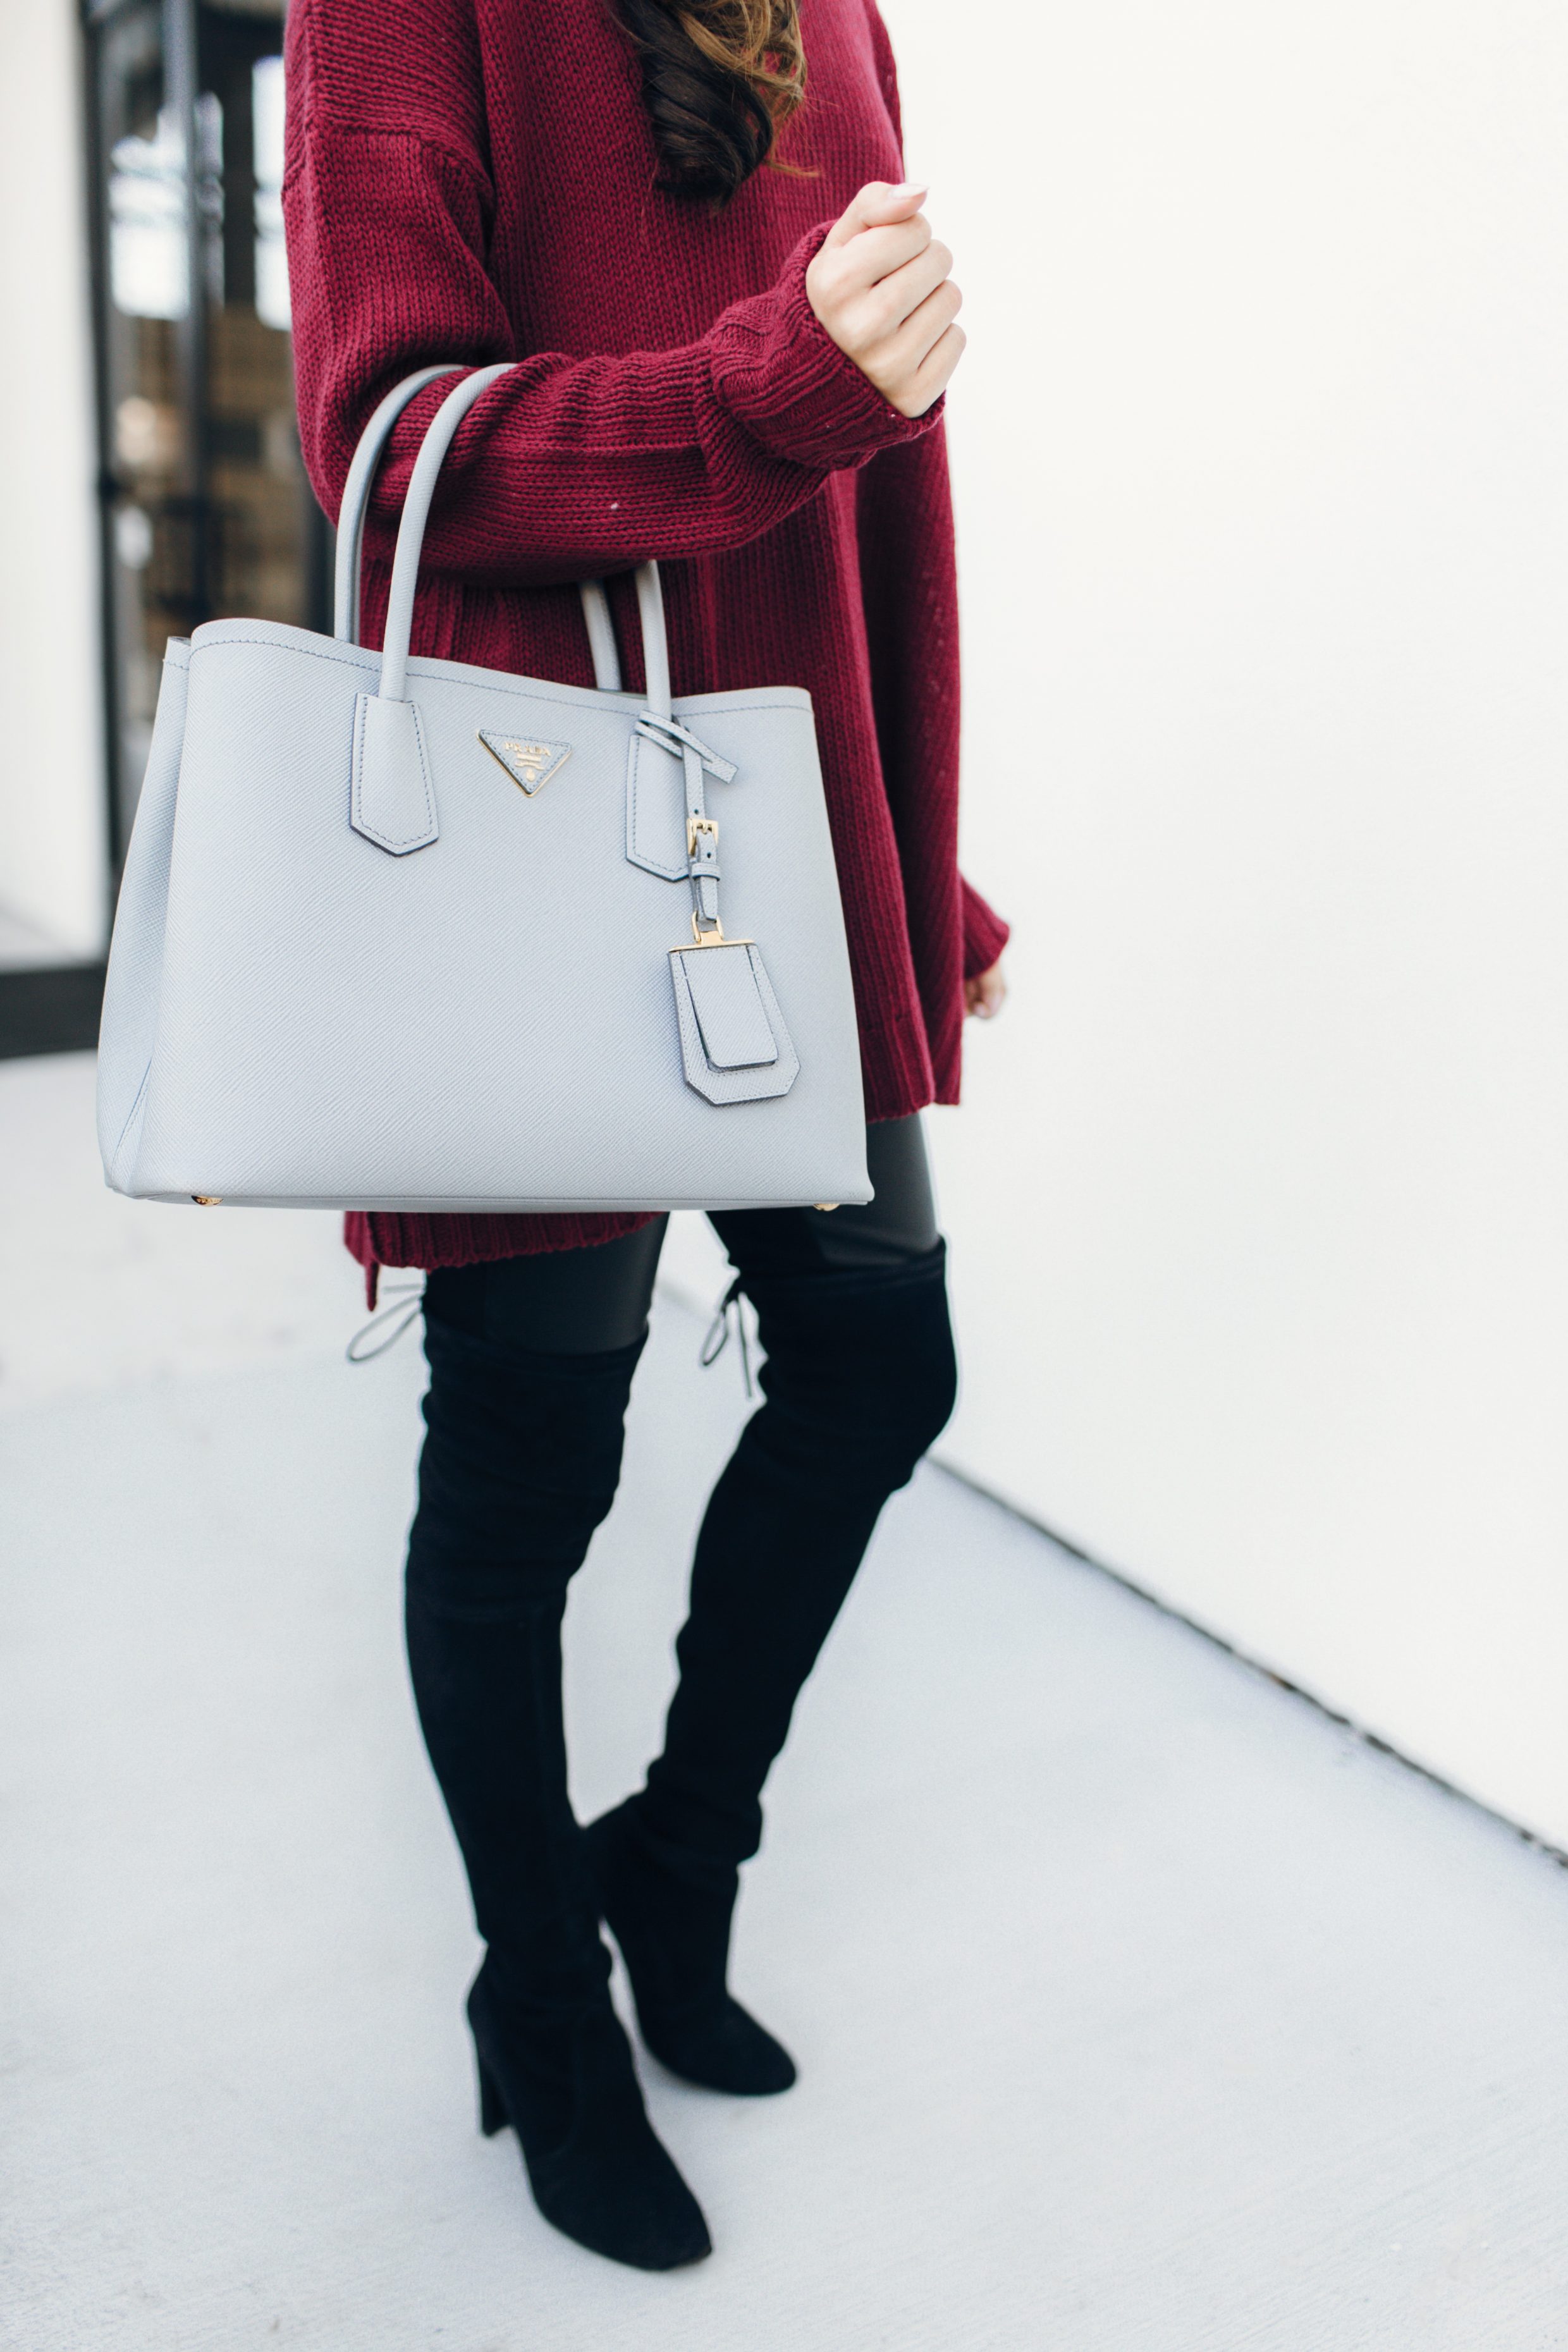 Maroon sweater with leather leggings and suede over the knee boots